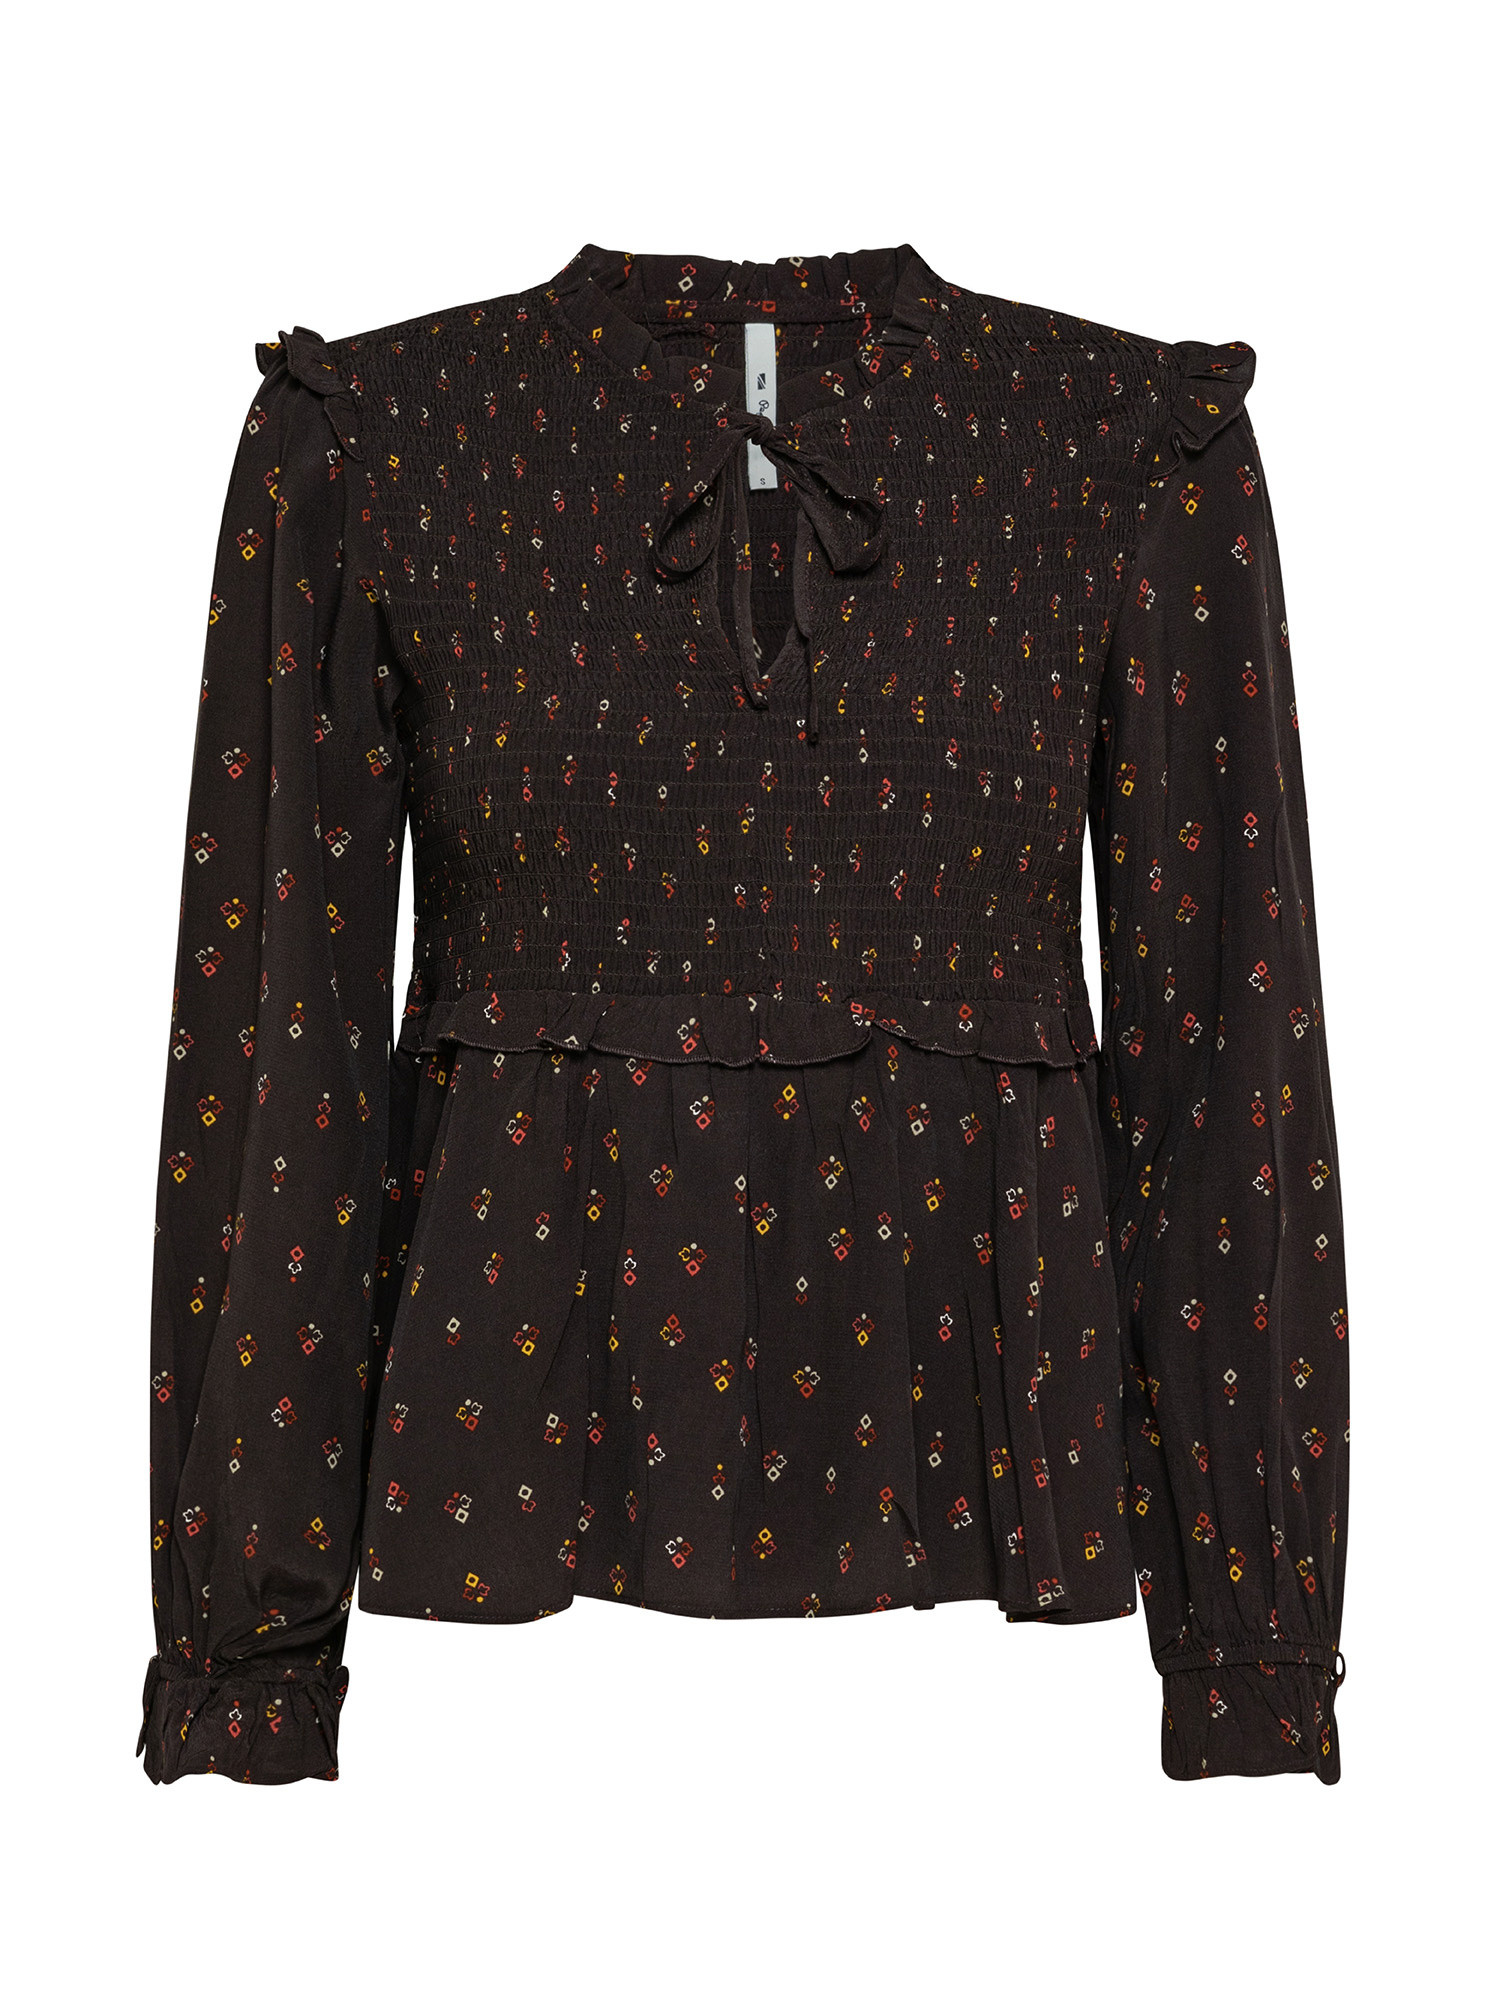 Nany honeycomb blouse, Brown, large image number 0